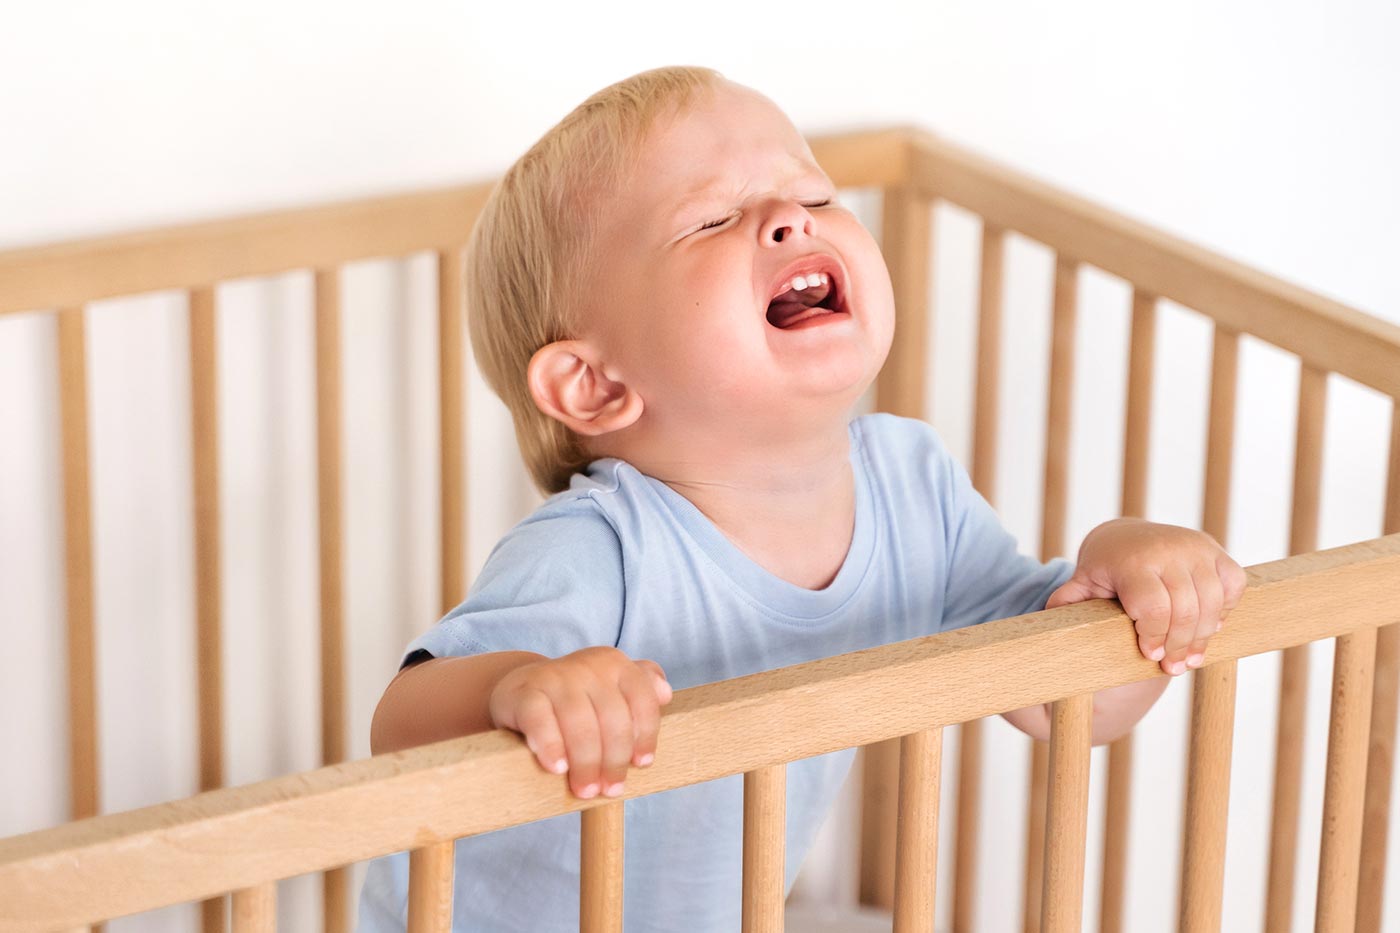 Toddler Wakes Up Too Early Crying